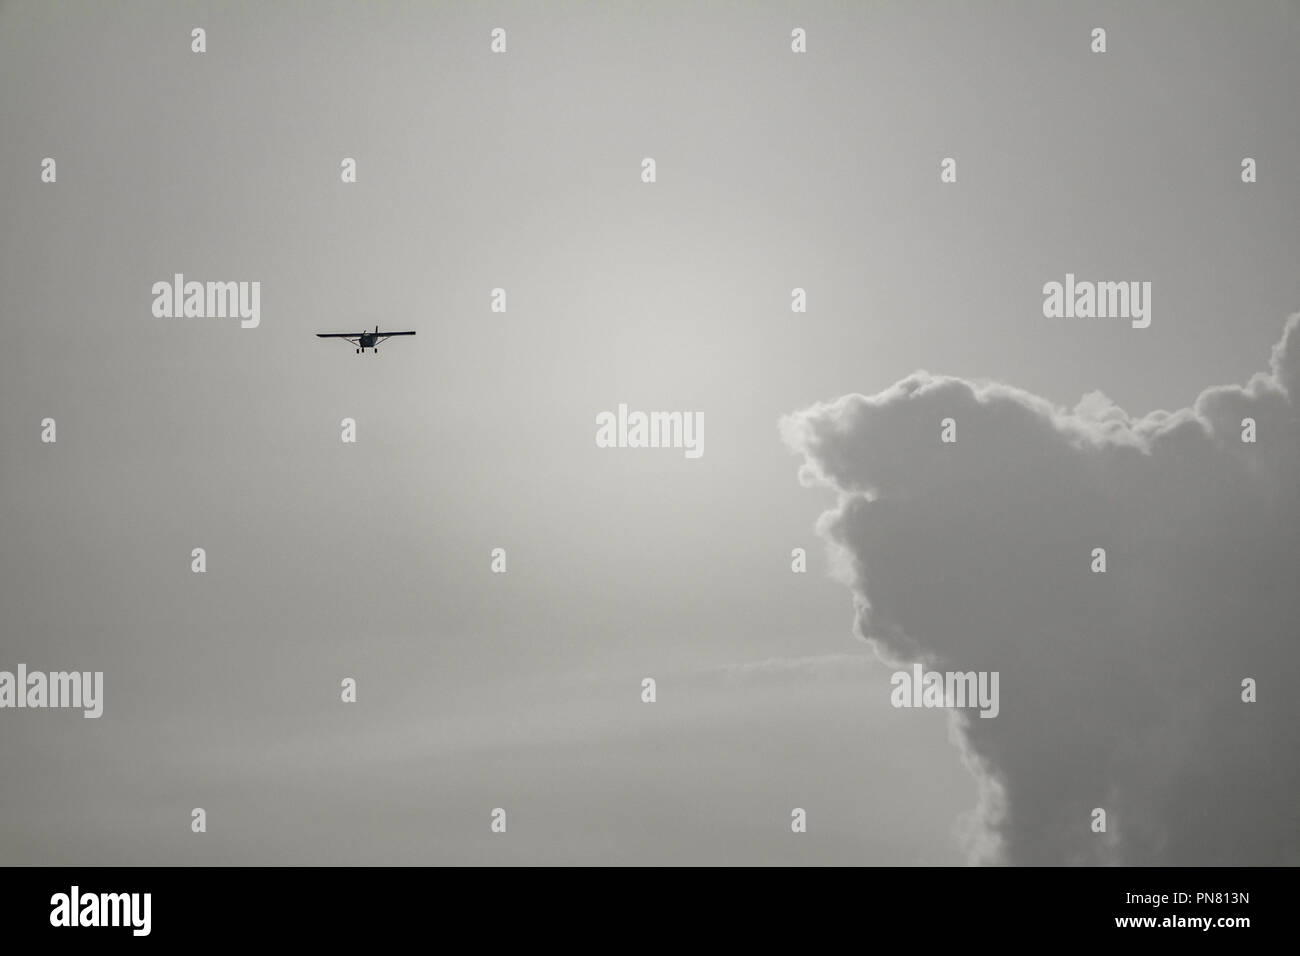 Small aircraft flying near huge clouds at dusk Stock Photo